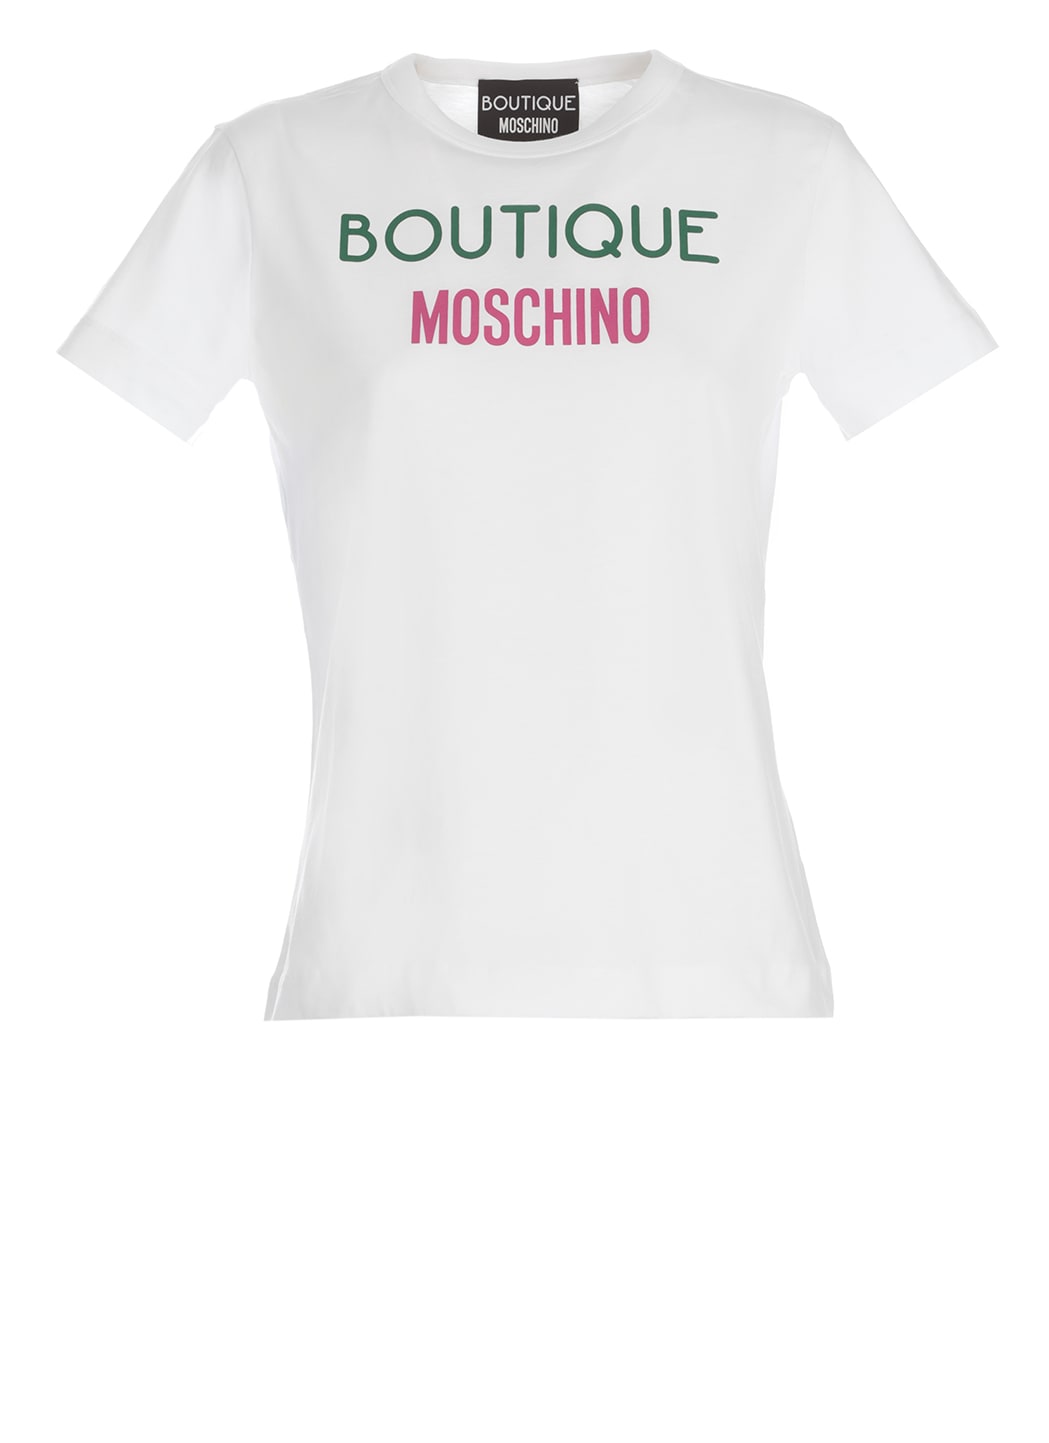 BOUTIQUE MOSCHINO T-SHIRT WITH LOGO